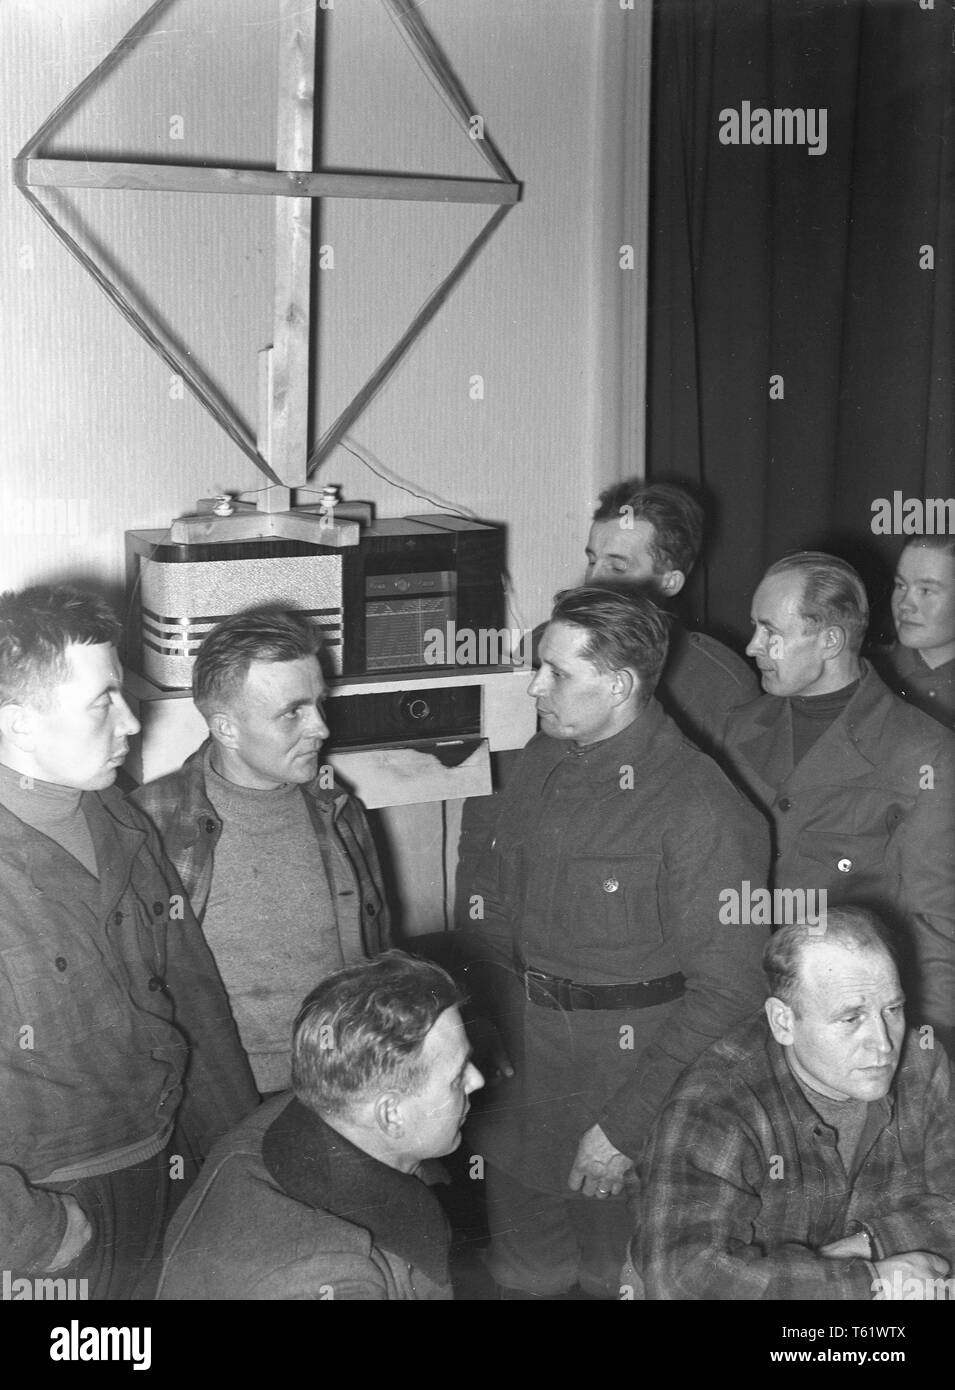 The Winter War. A military conflict between the Soviet union and Finland. It began with a Soviet invasion on november 1939 when Soviet infantery crossed the border on the Karelian Isthmus. About 9500 Swedish voluntary soldiers participated in the war. Finnish soldiers are listening to a radio broadcast. January 1940. Photo Kristoffersson ref 99-2 Stock Photo